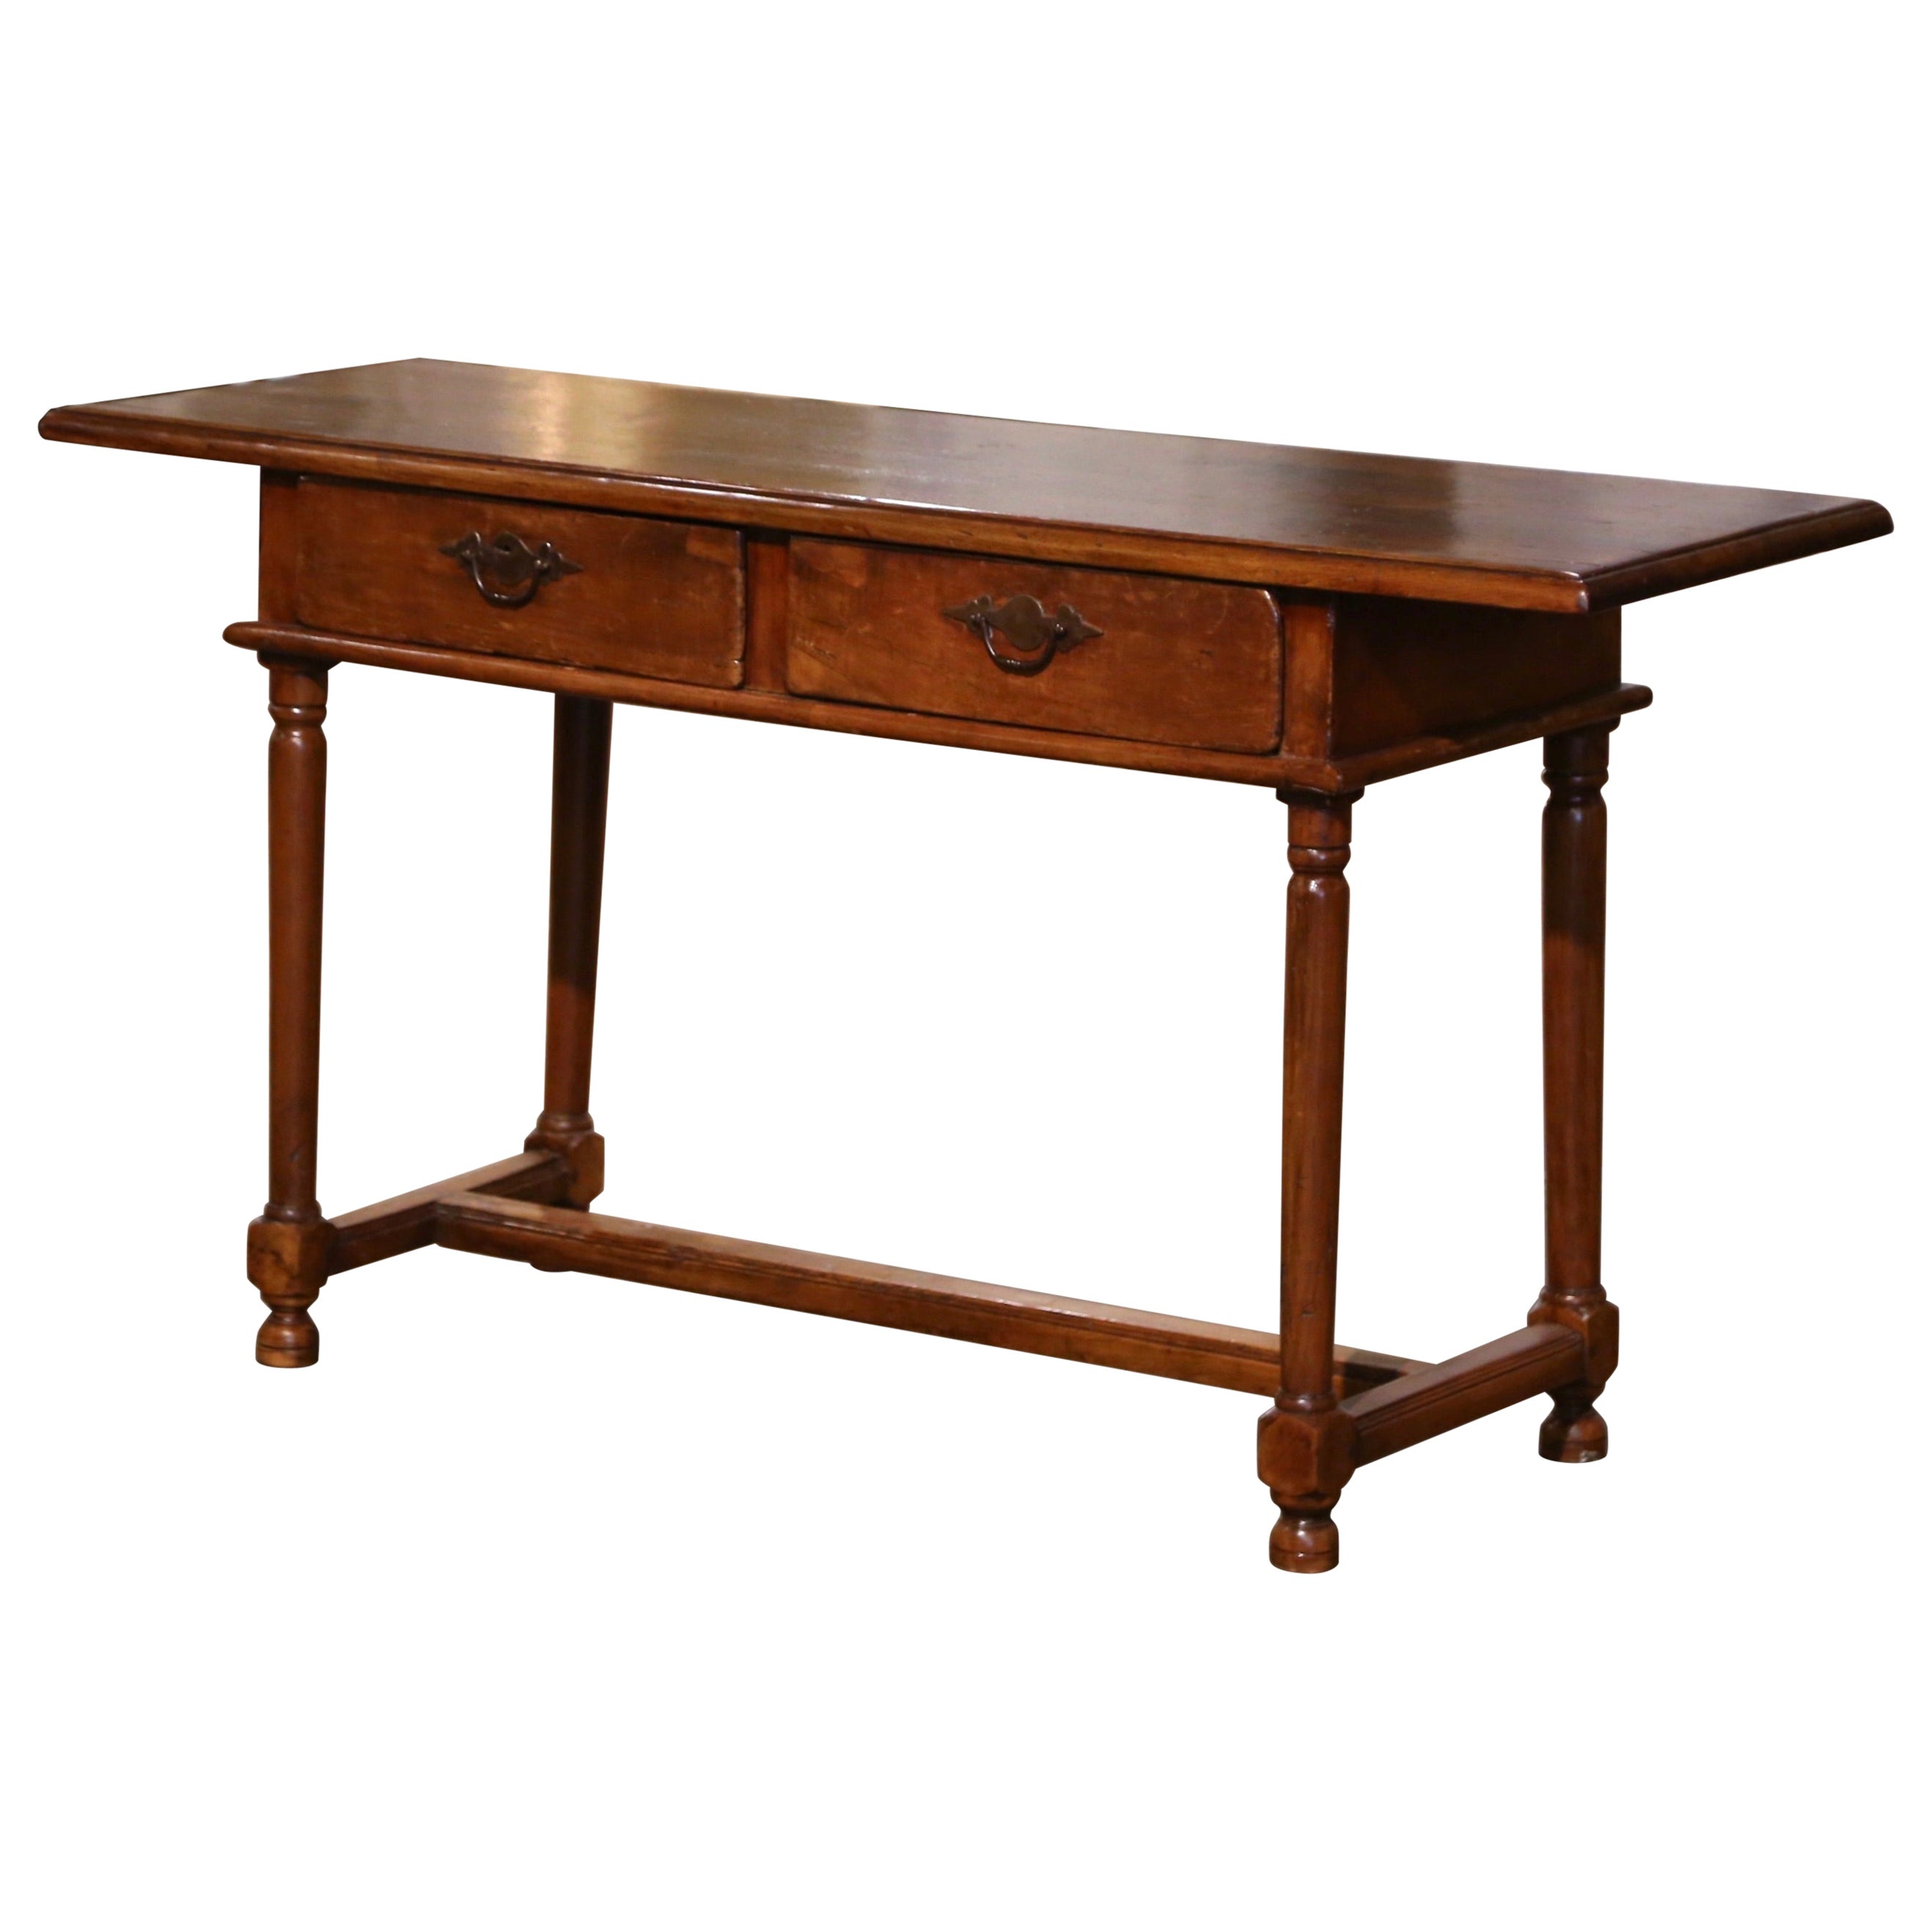 Mid-19th Century French Empire Walnut Console Table with Drawers For Sale